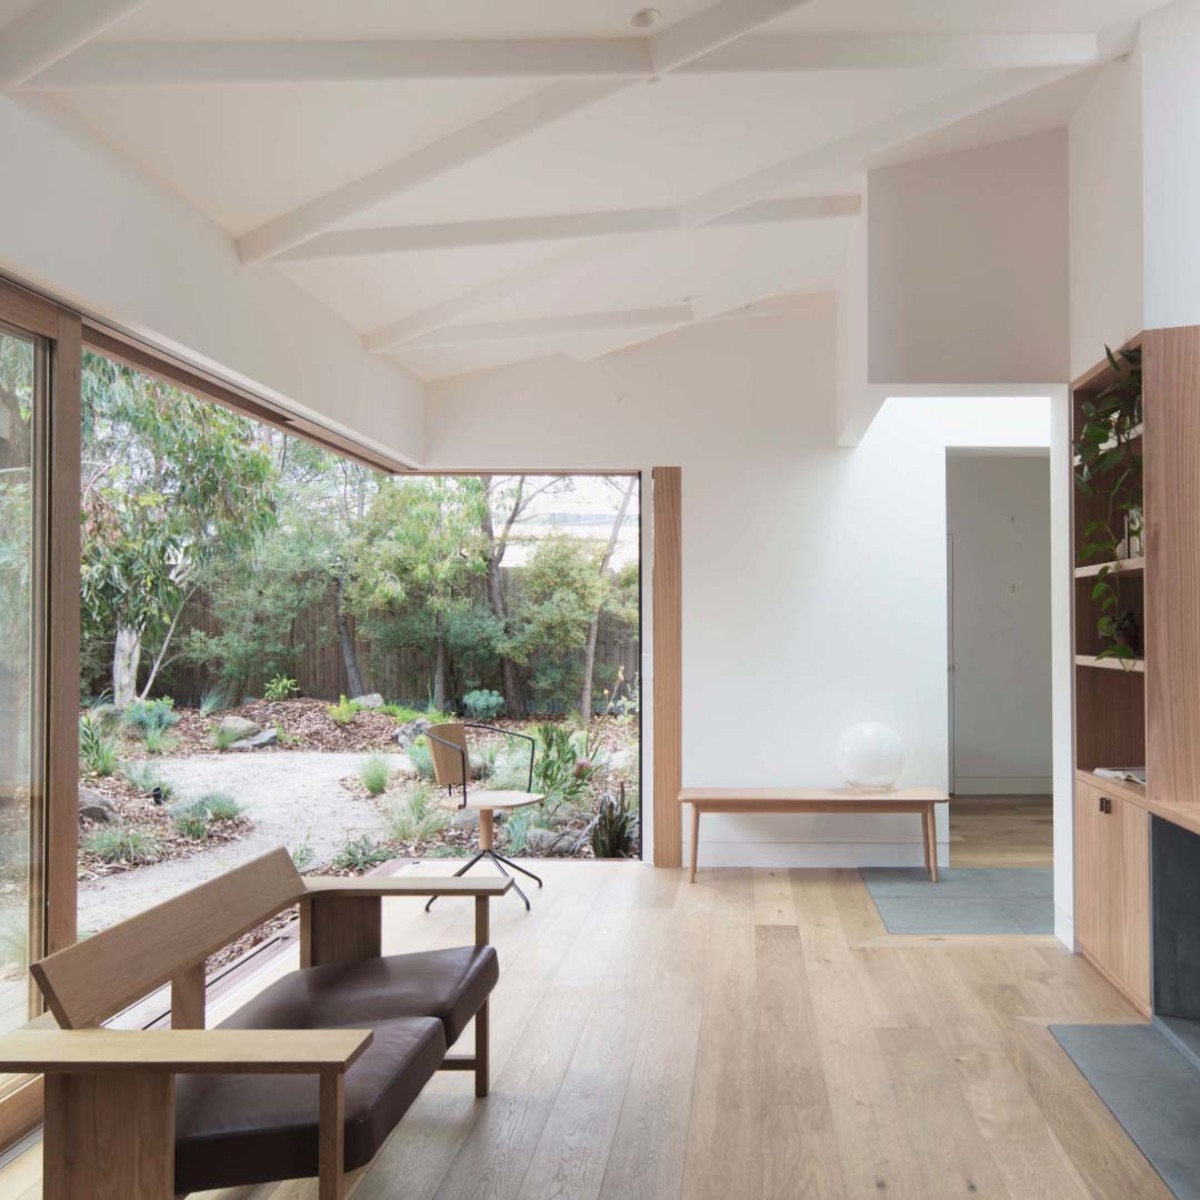 Brunswick House, Winwood McKenzie Architecture, shortlisted for Residential Alteration and Additions